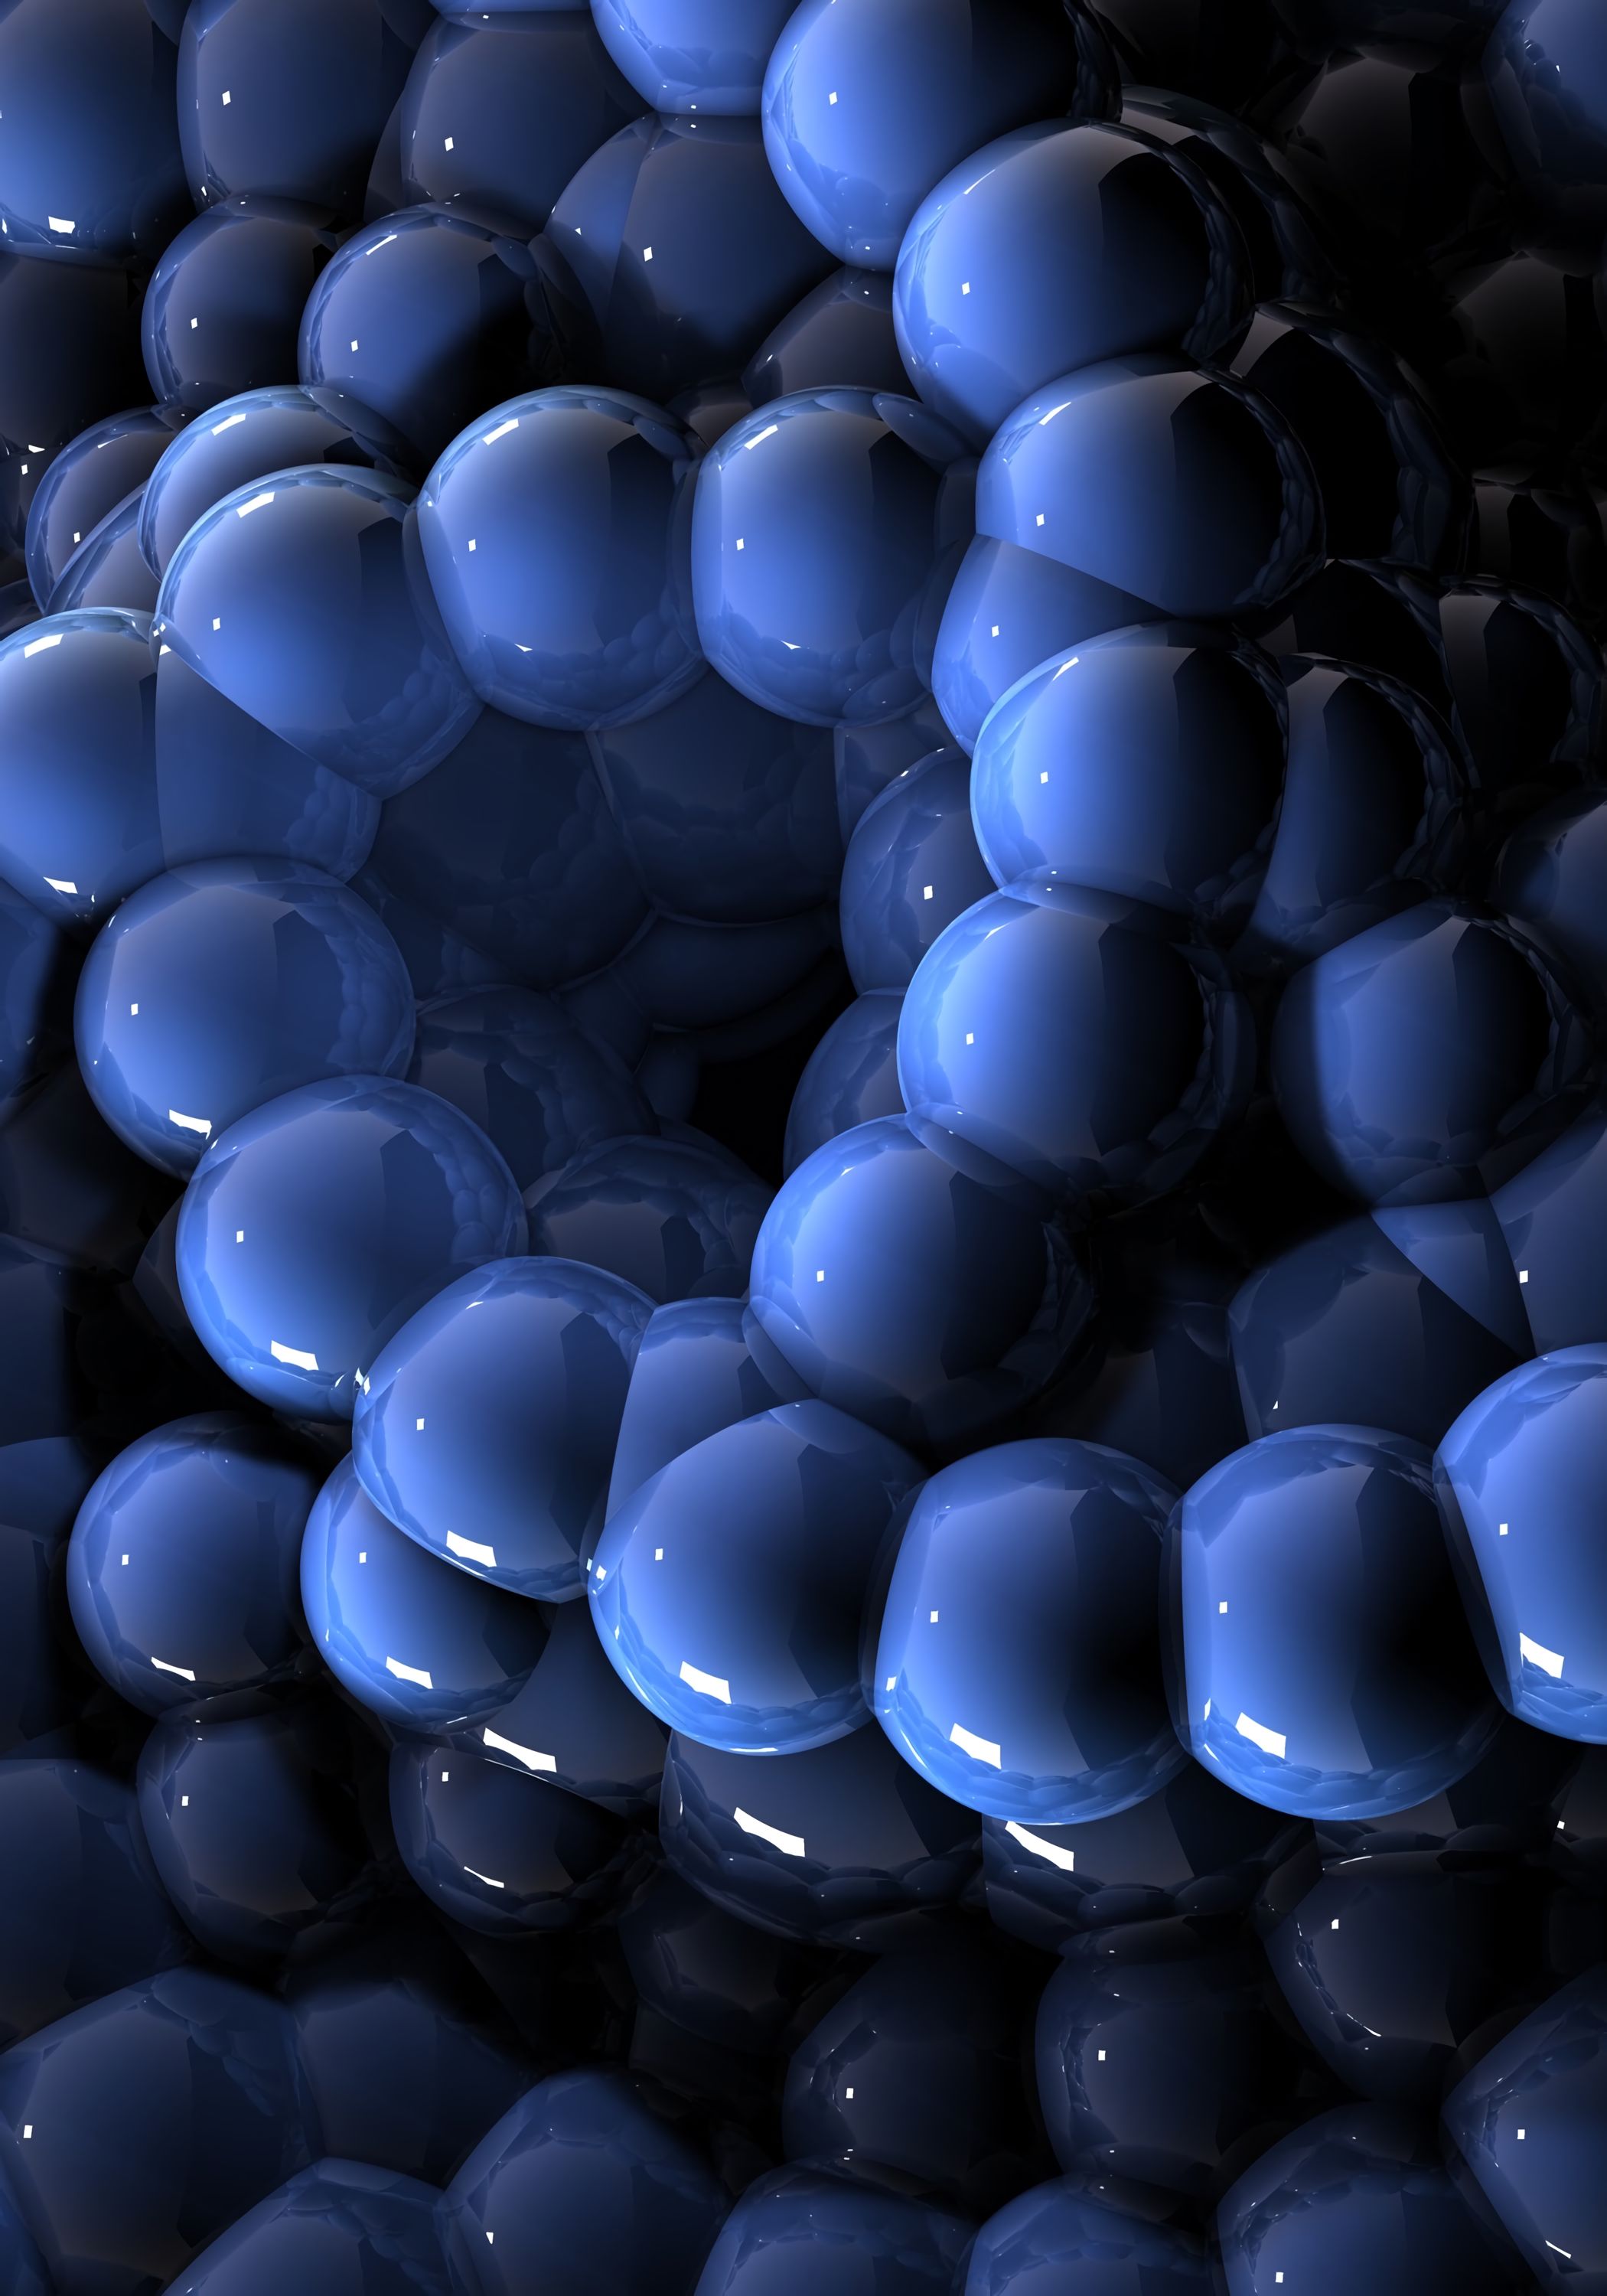 3d, balls, dark, sphere, connections, connection, spheres, magnet cell phone wallpapers